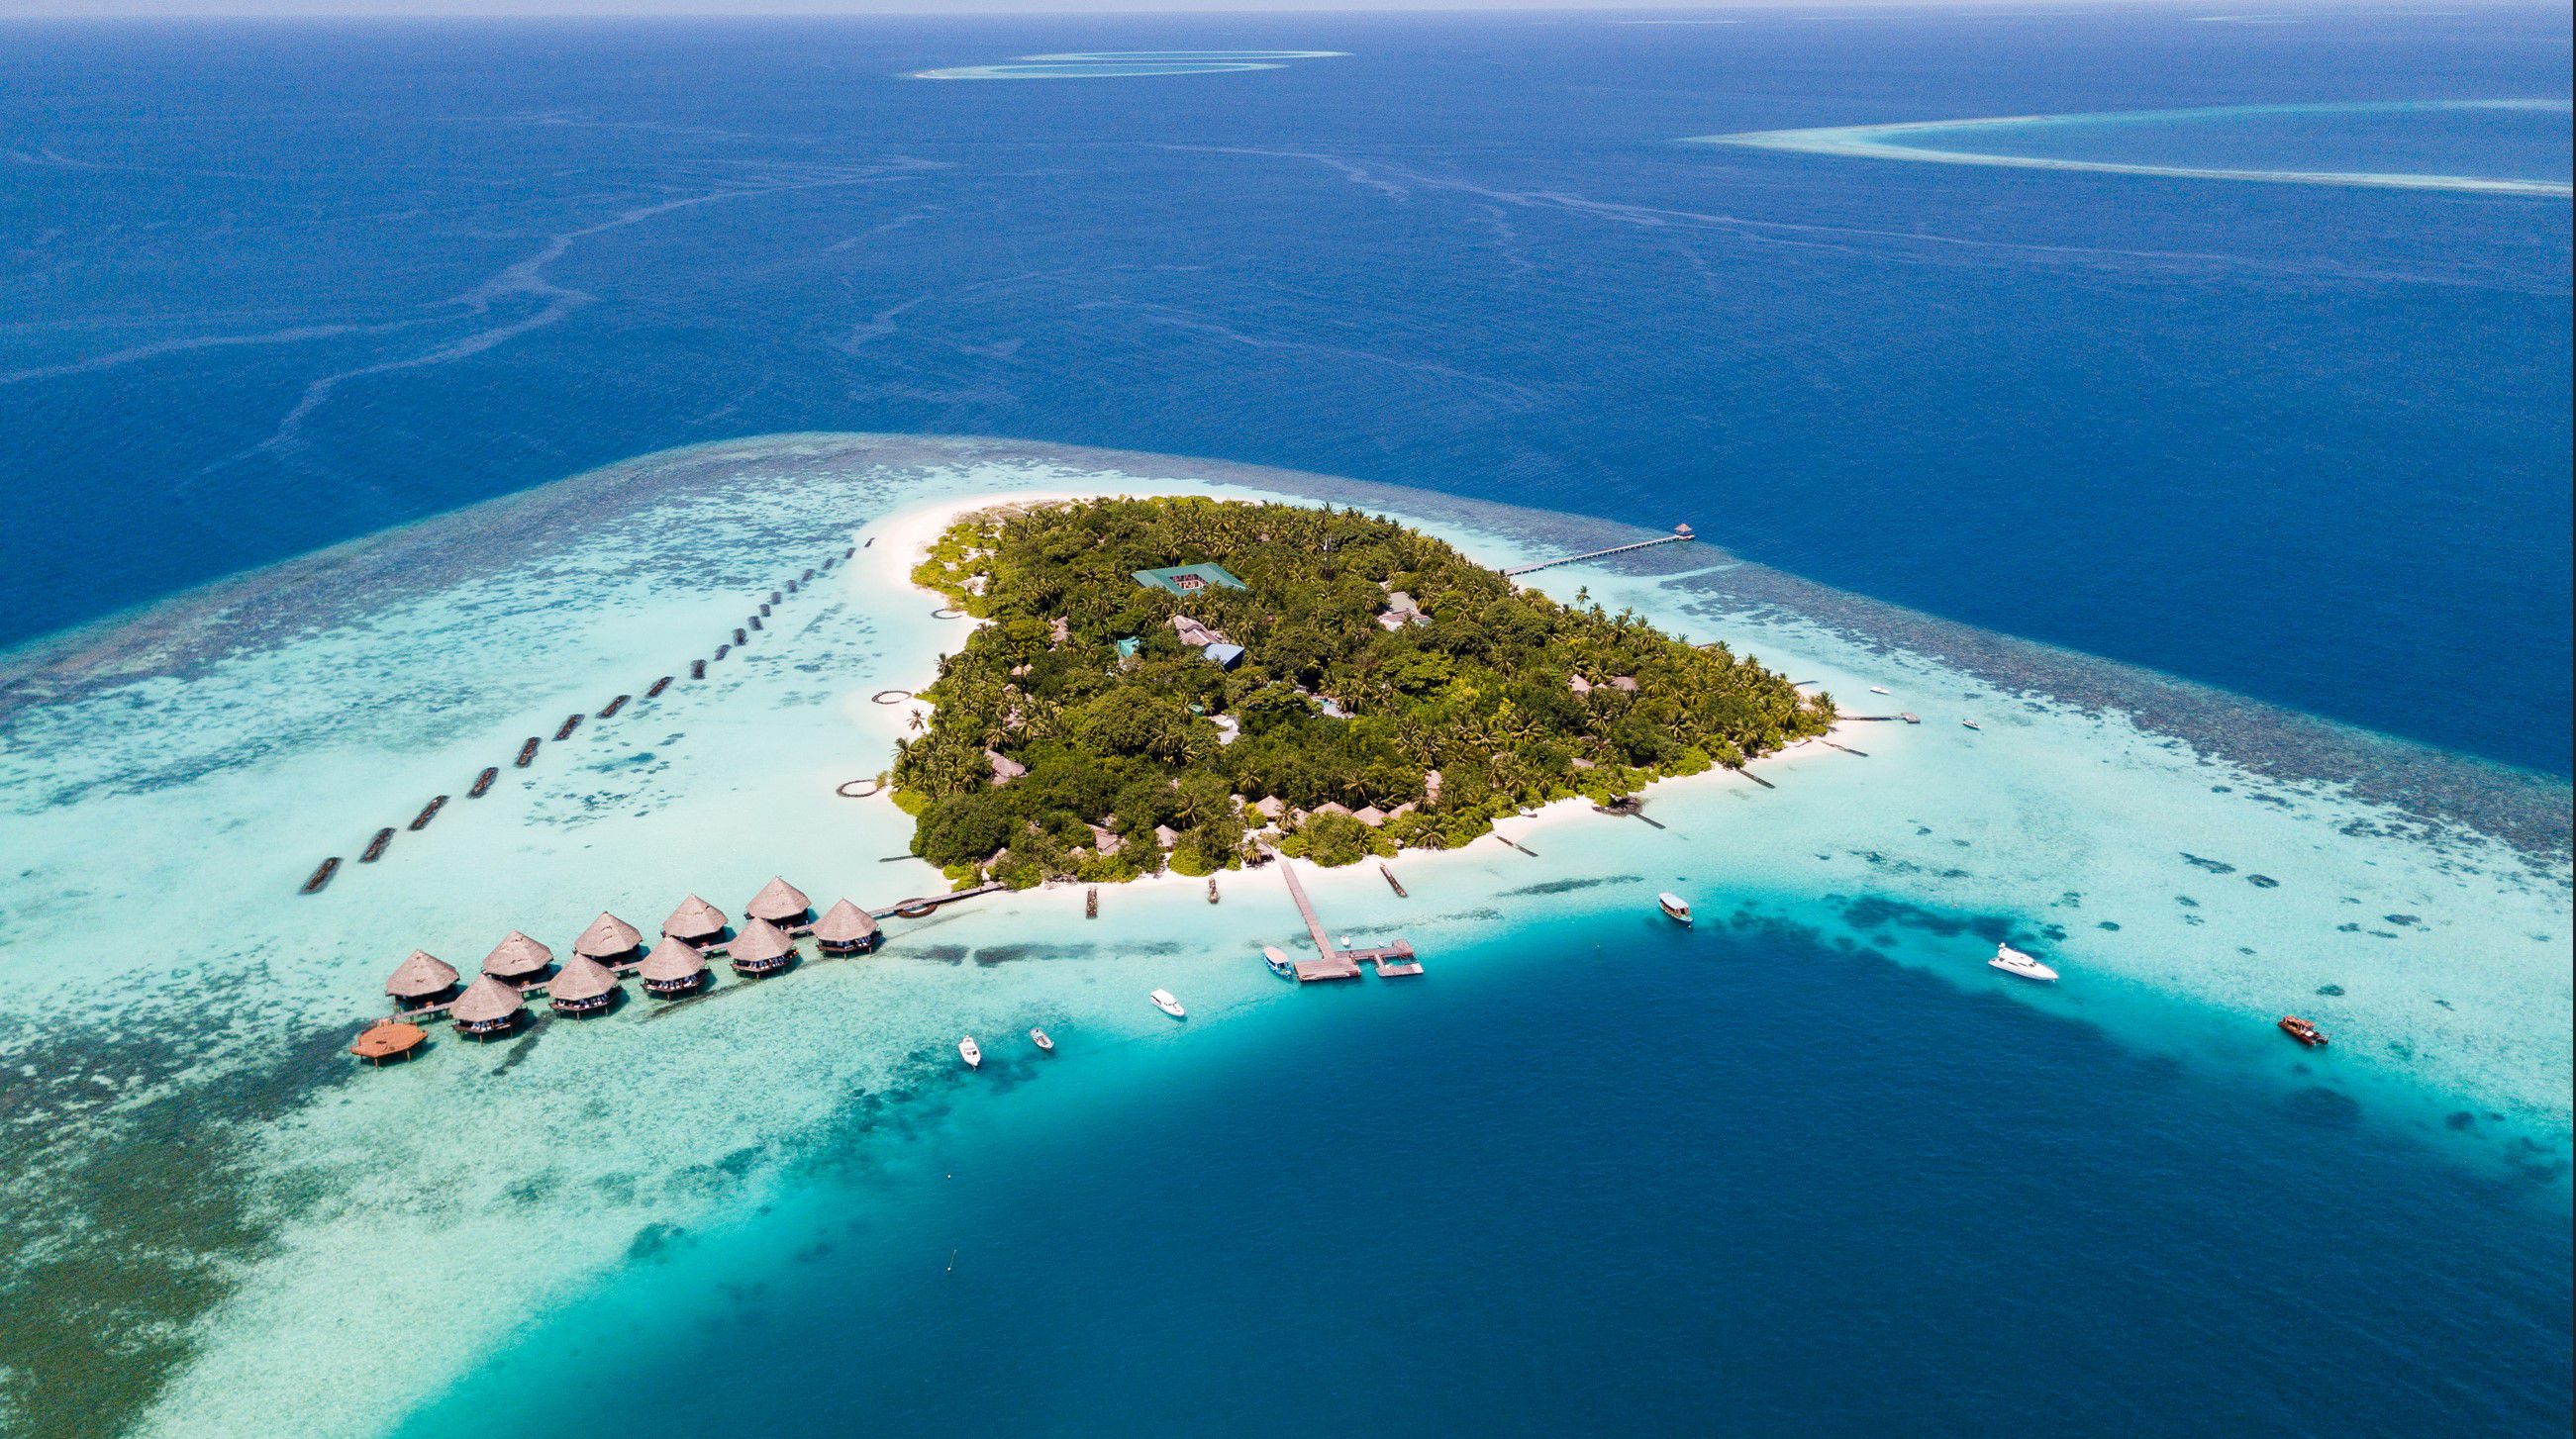 <p>Not only does the Maldives boast being one of the first countries to allow vaccinated visitors back, but it’s also planning on offering vaccines to tourists. That means more people will soon be able to safely enjoy the Maldives' archipelagos and beaches. </p>